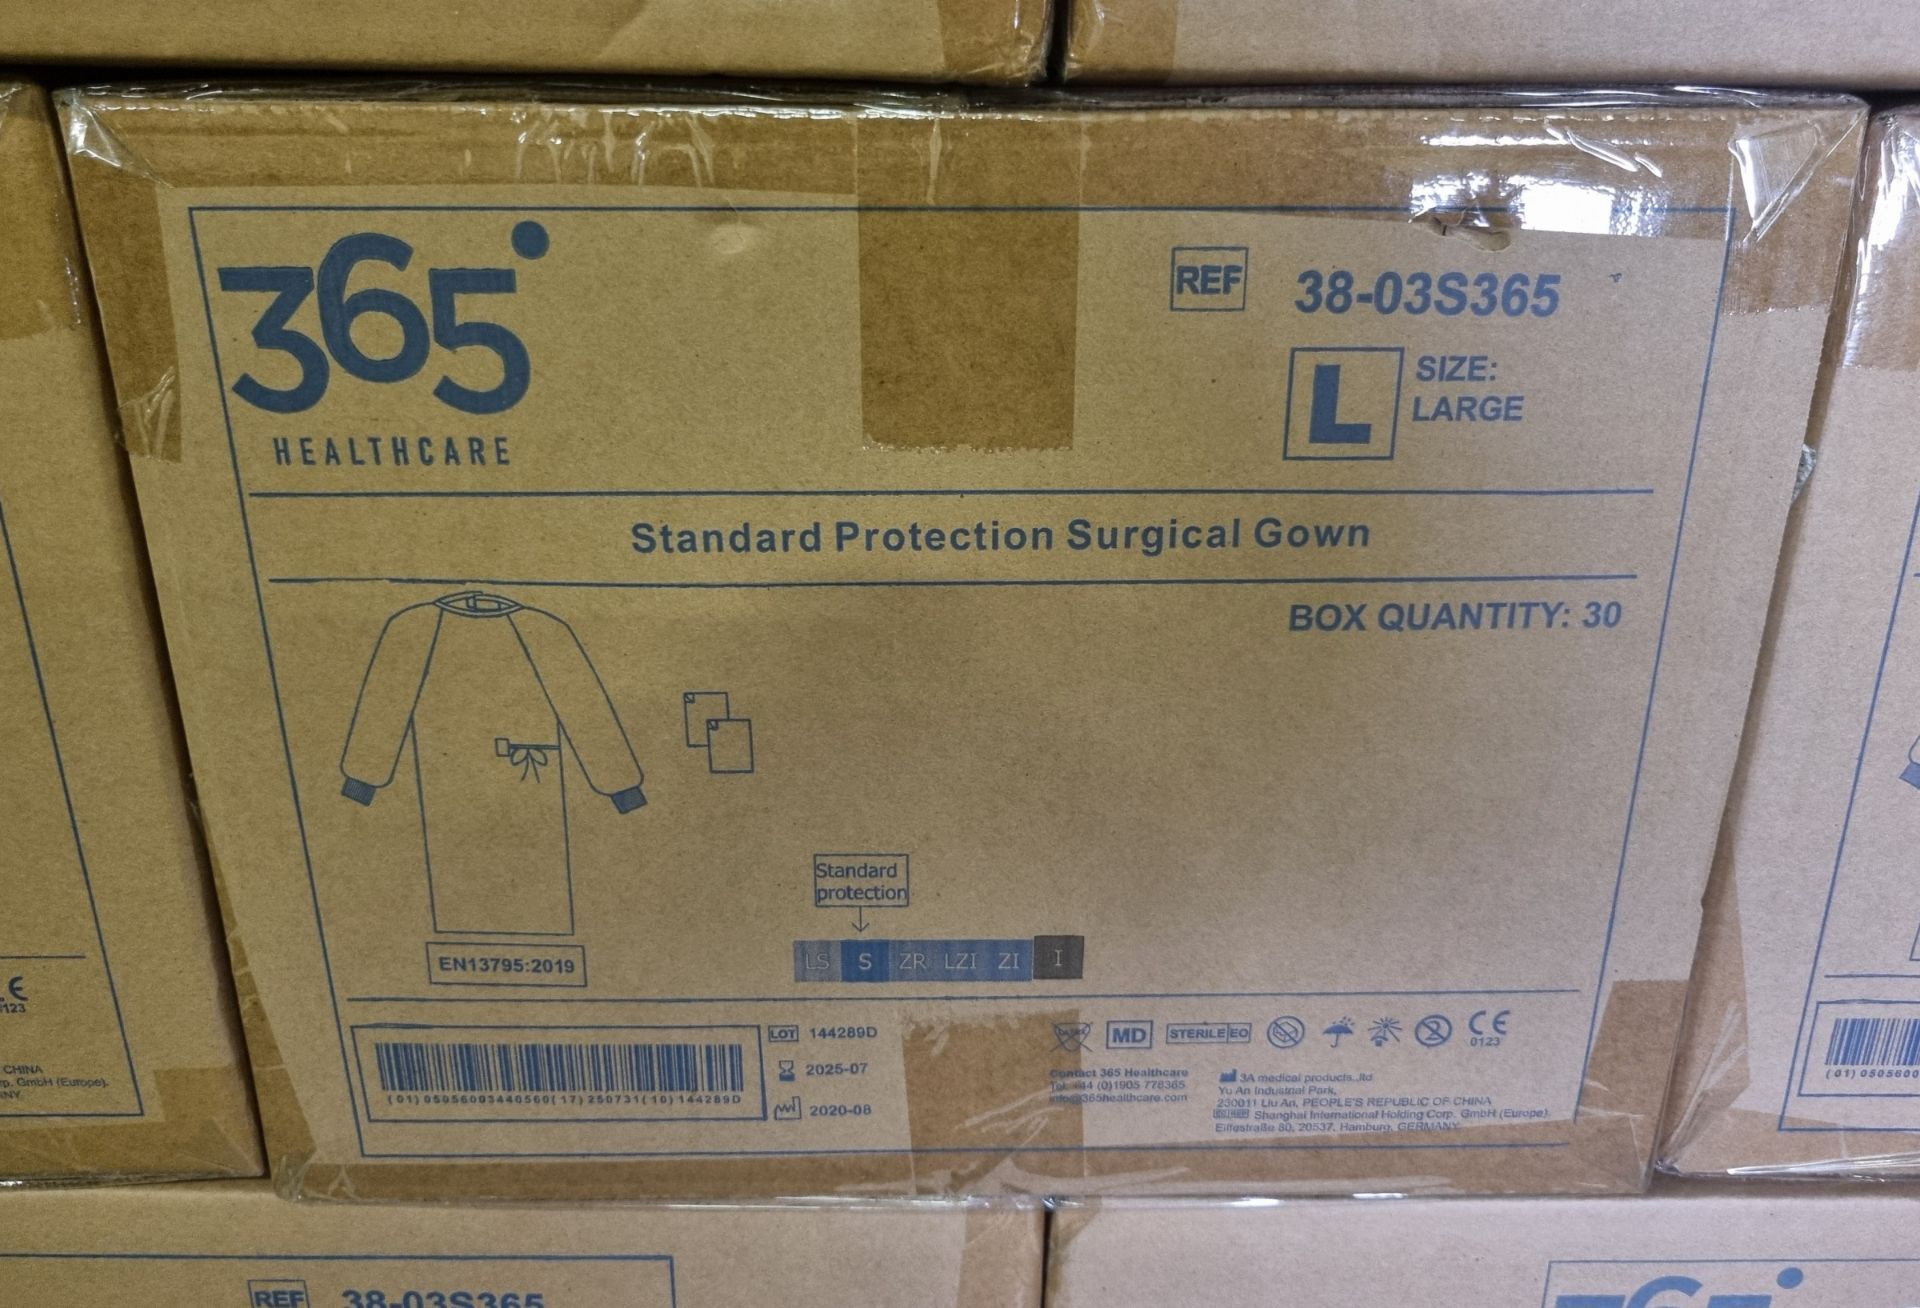 25x boxes of 365 Healthcare standard protection surgical gowns - large - expiration date: 07/2025 - Image 2 of 5